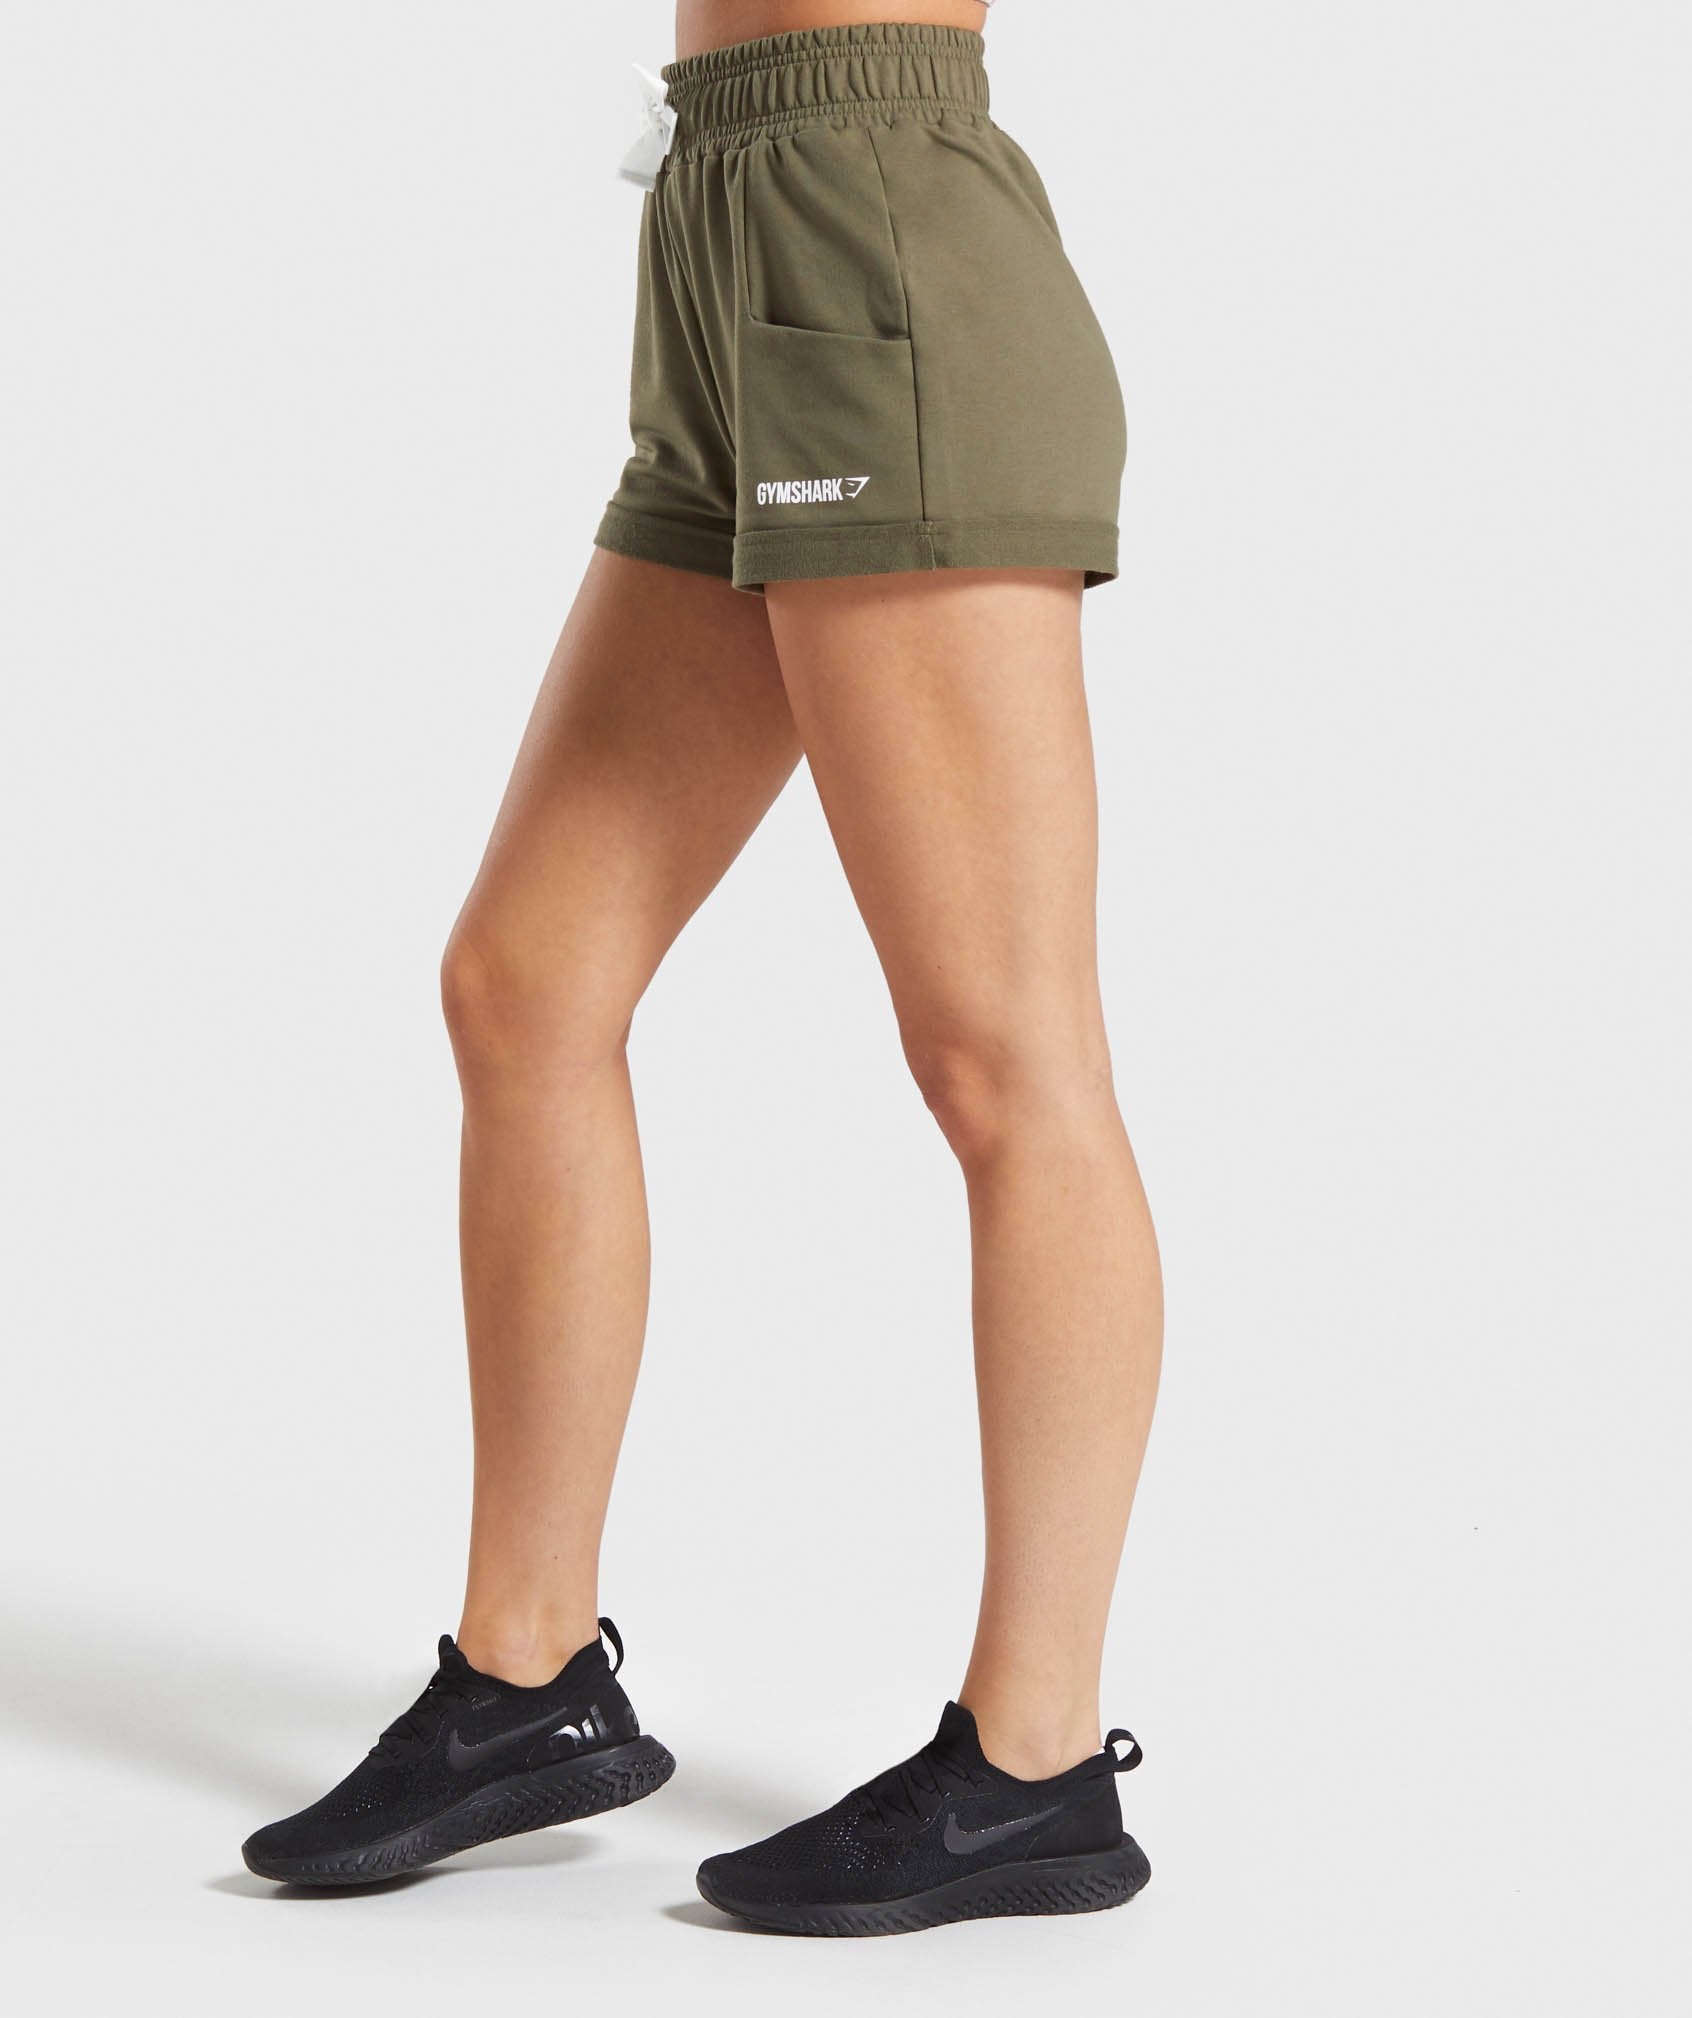 Ark High Waisted Shorts in Khaki - view 3